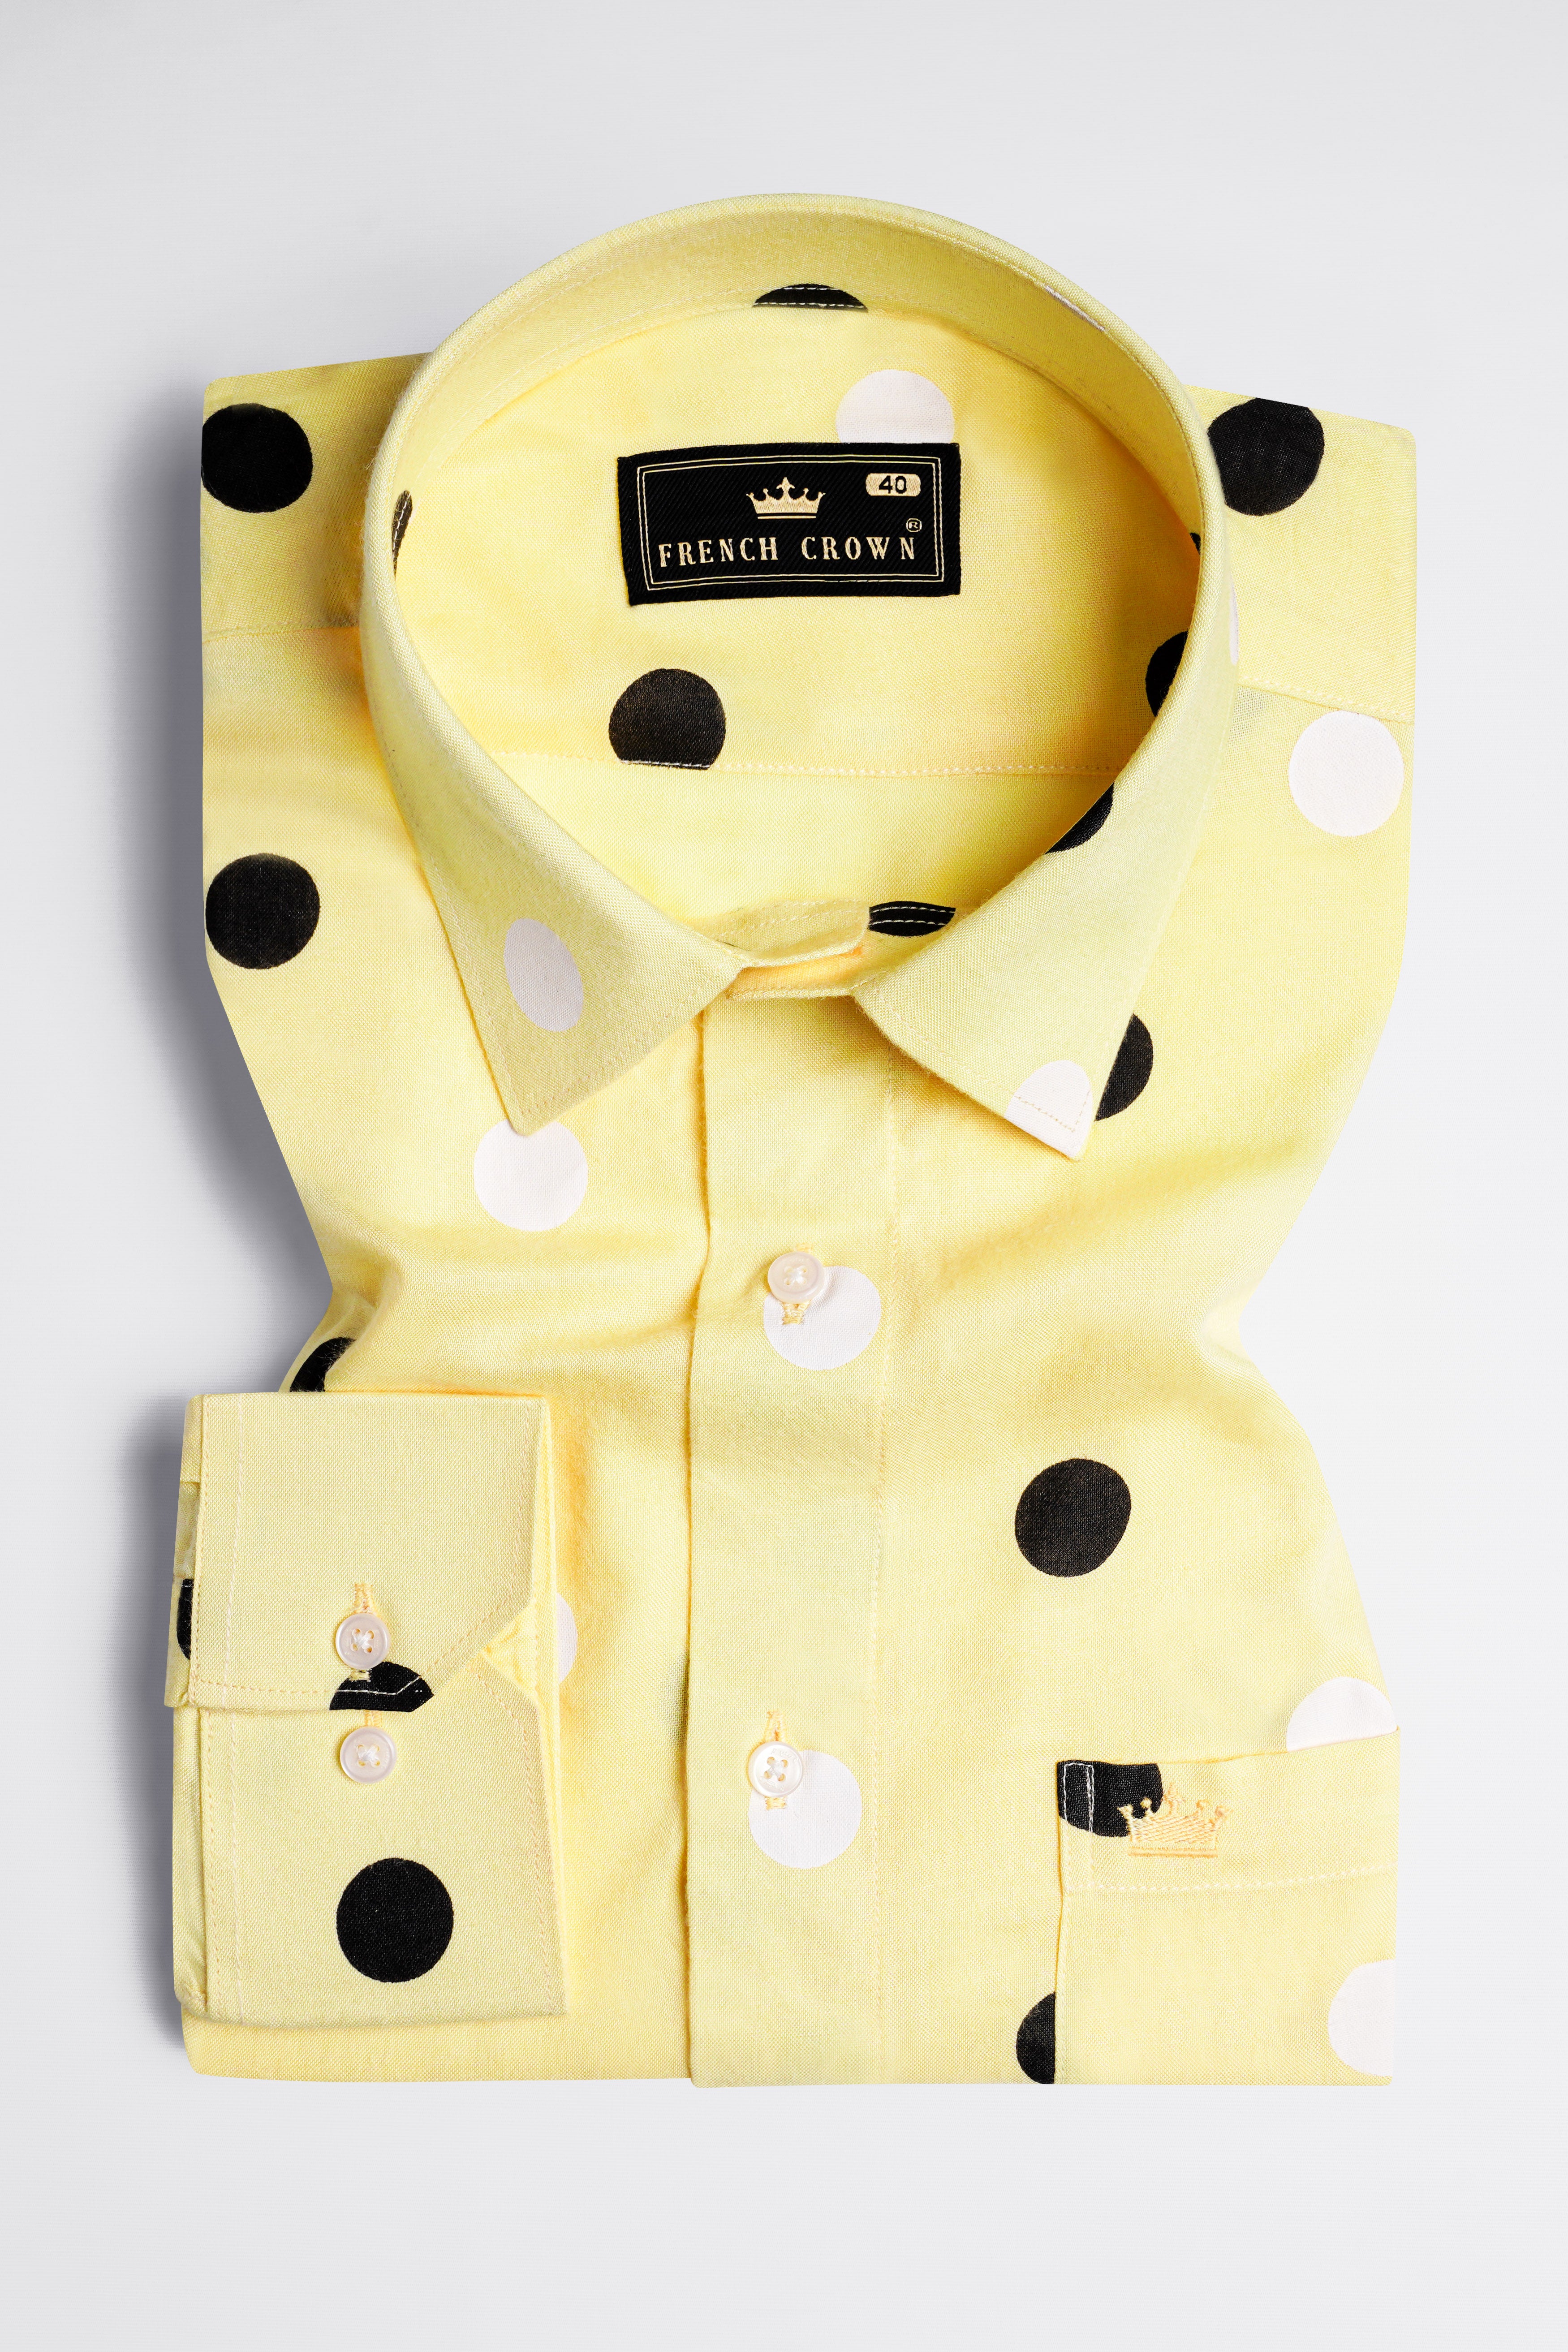 Parchment Yellow with Black and White Polka Dotted Premium Cotton Shirt